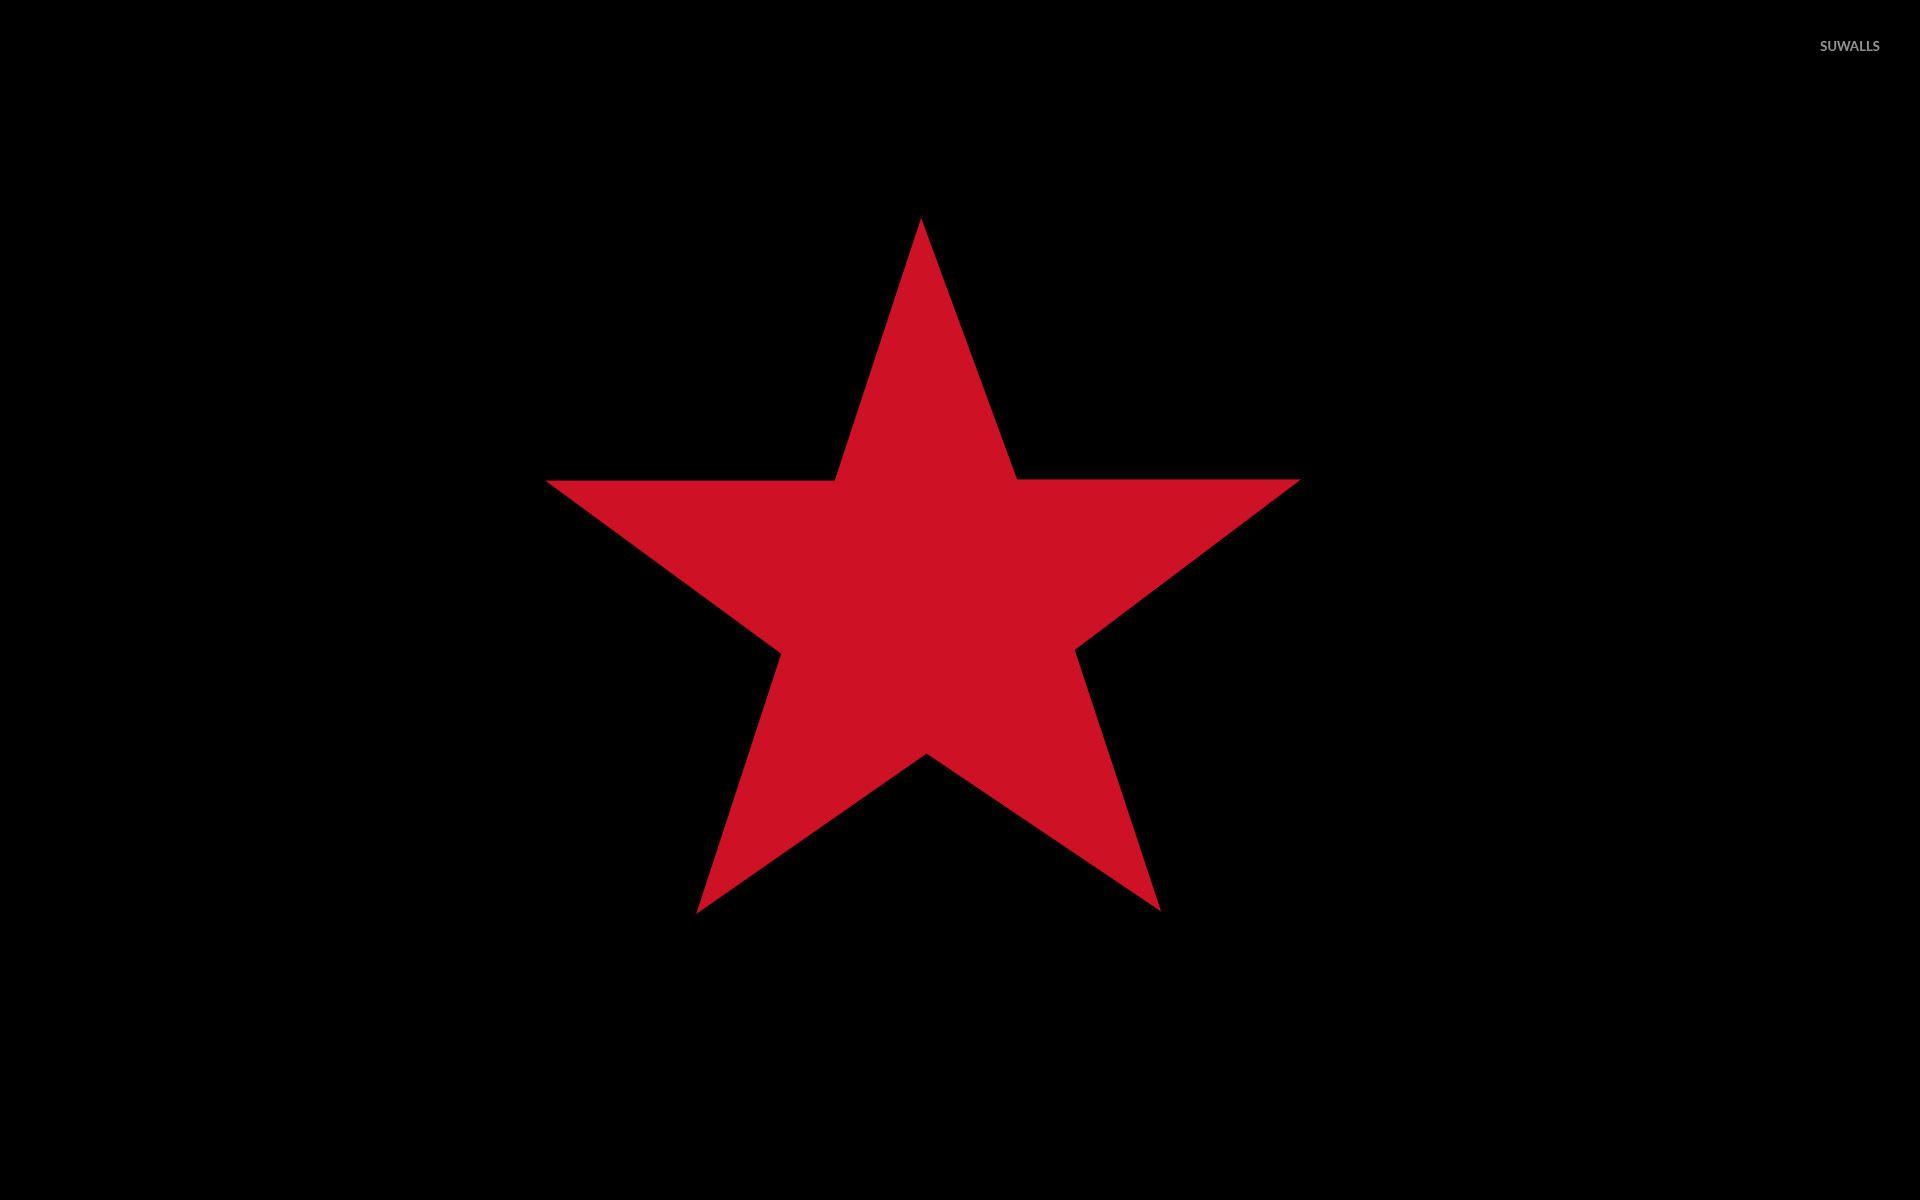 Black and Red Star Logo - Best Free Red Star Wallpaper